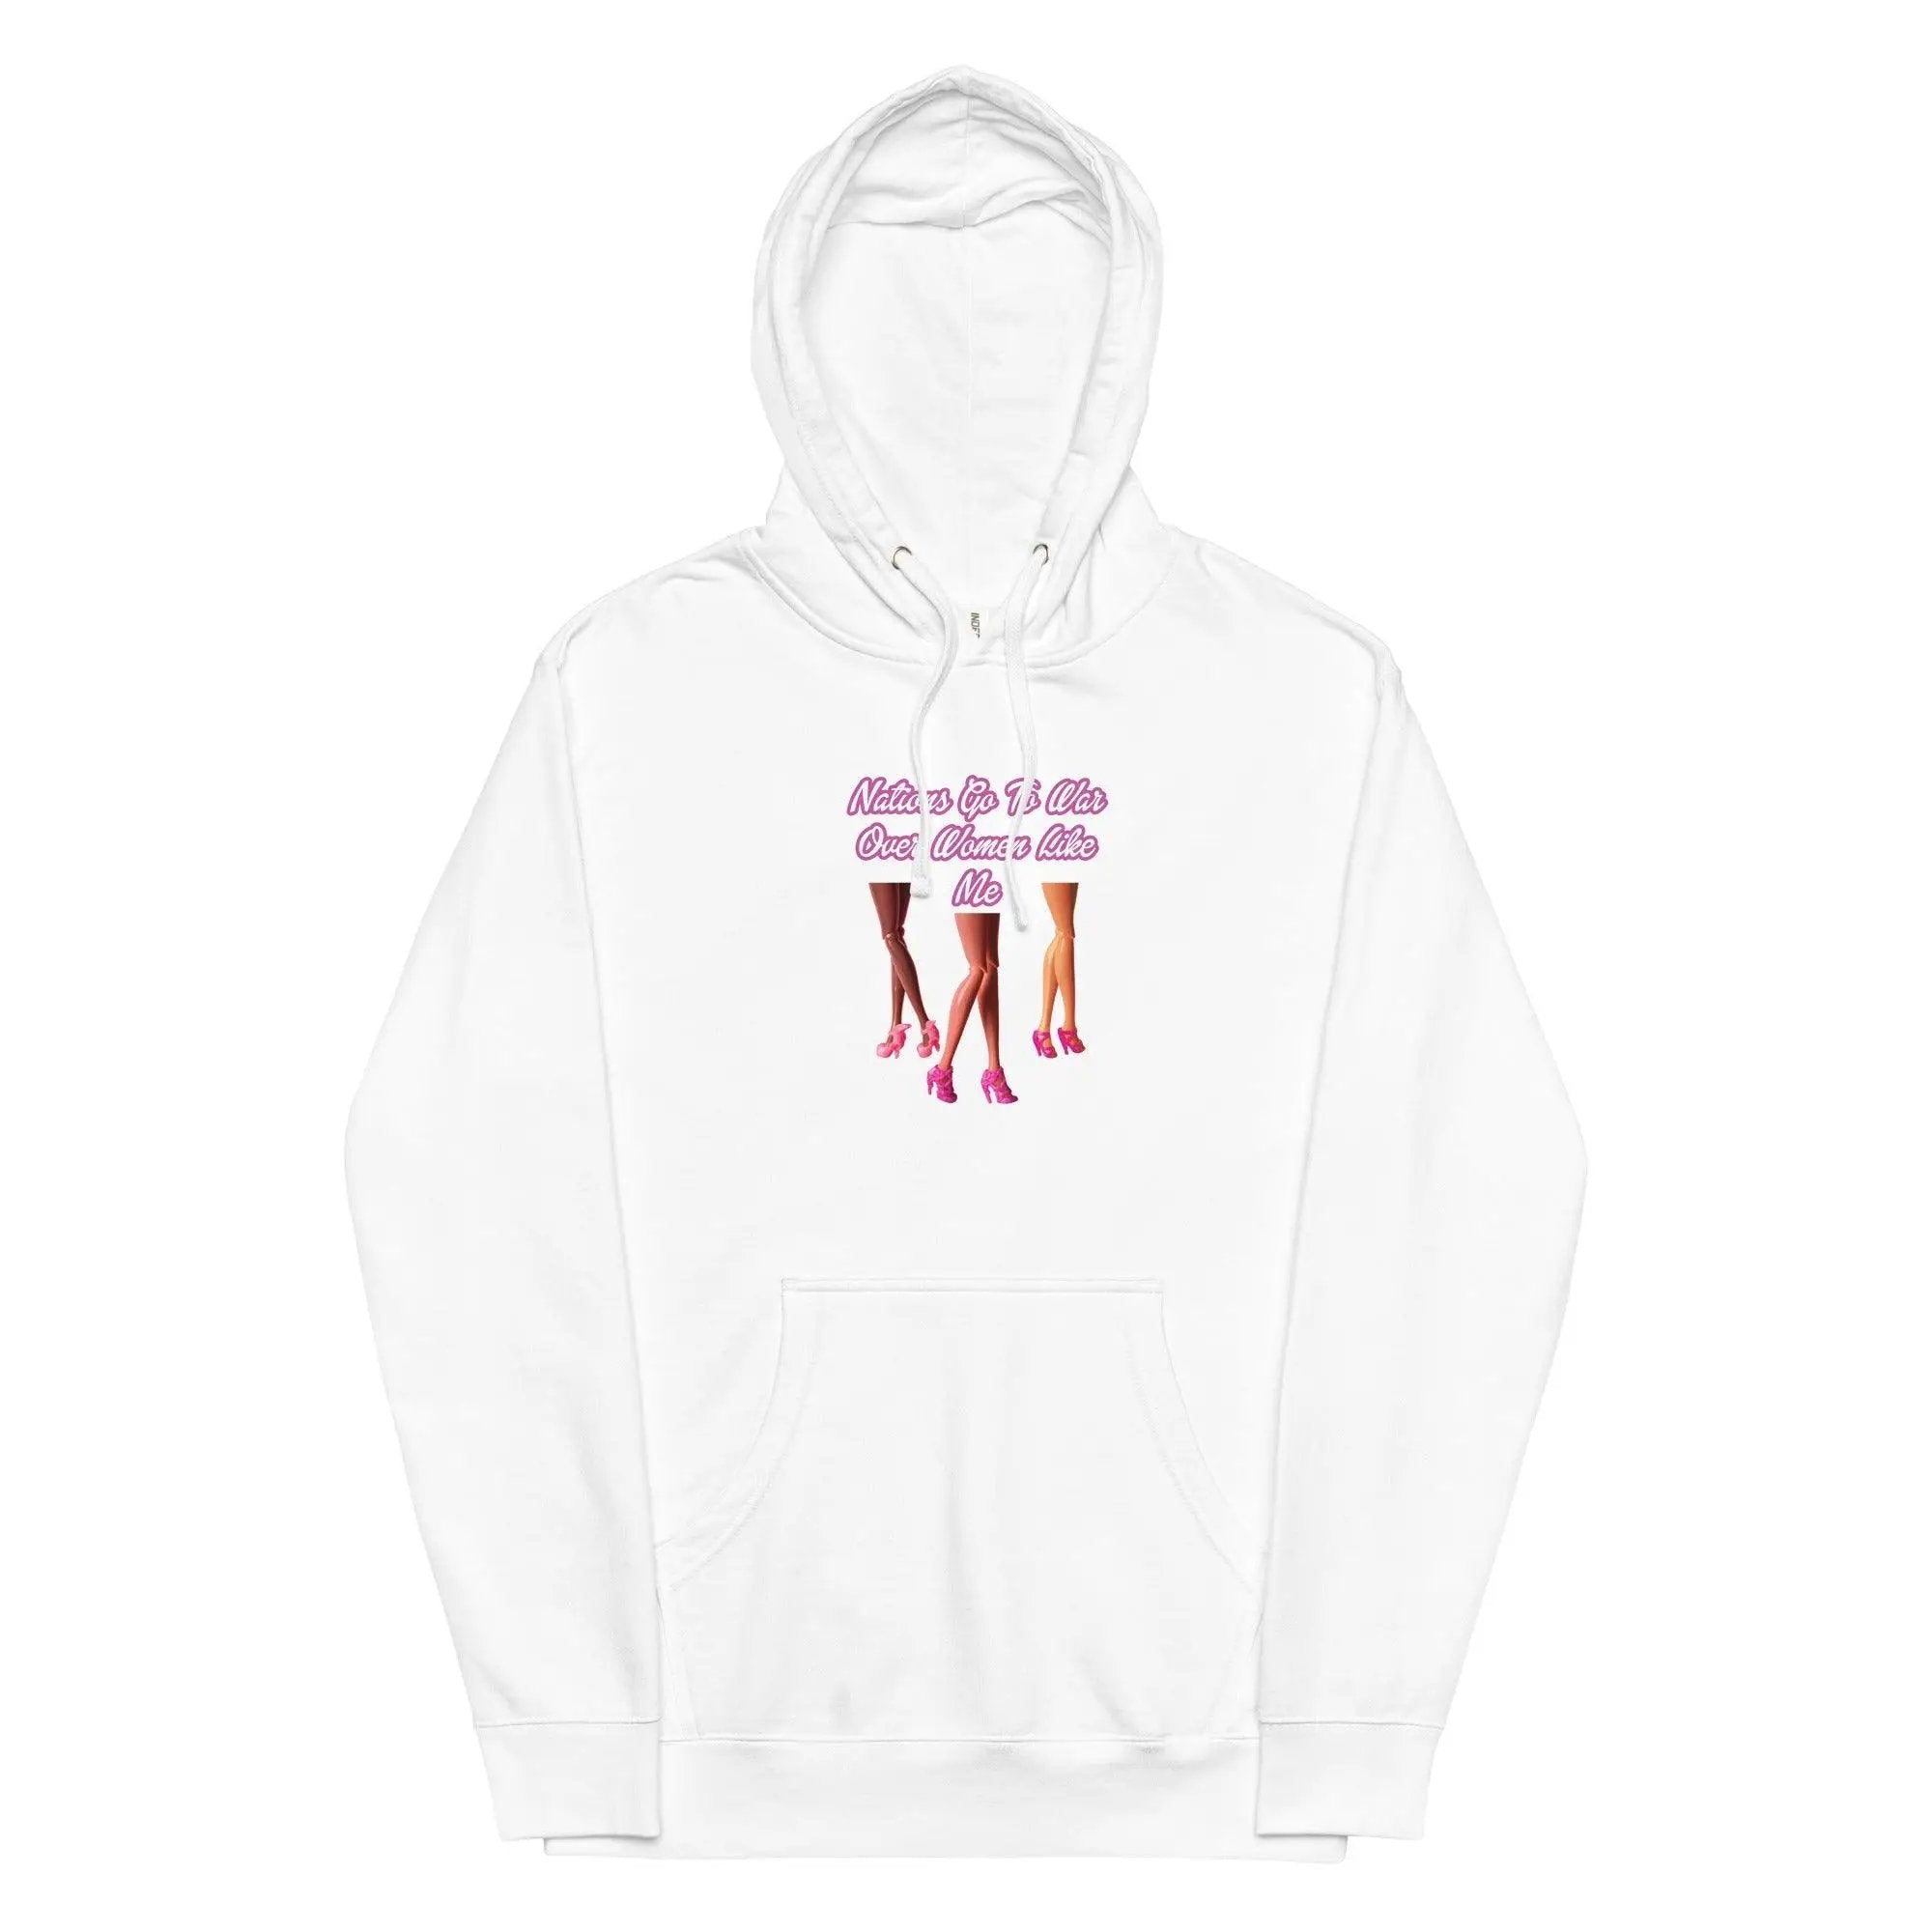 Nations Go To War Over Women Like Me Unisex midweight hoodie VAWDesigns